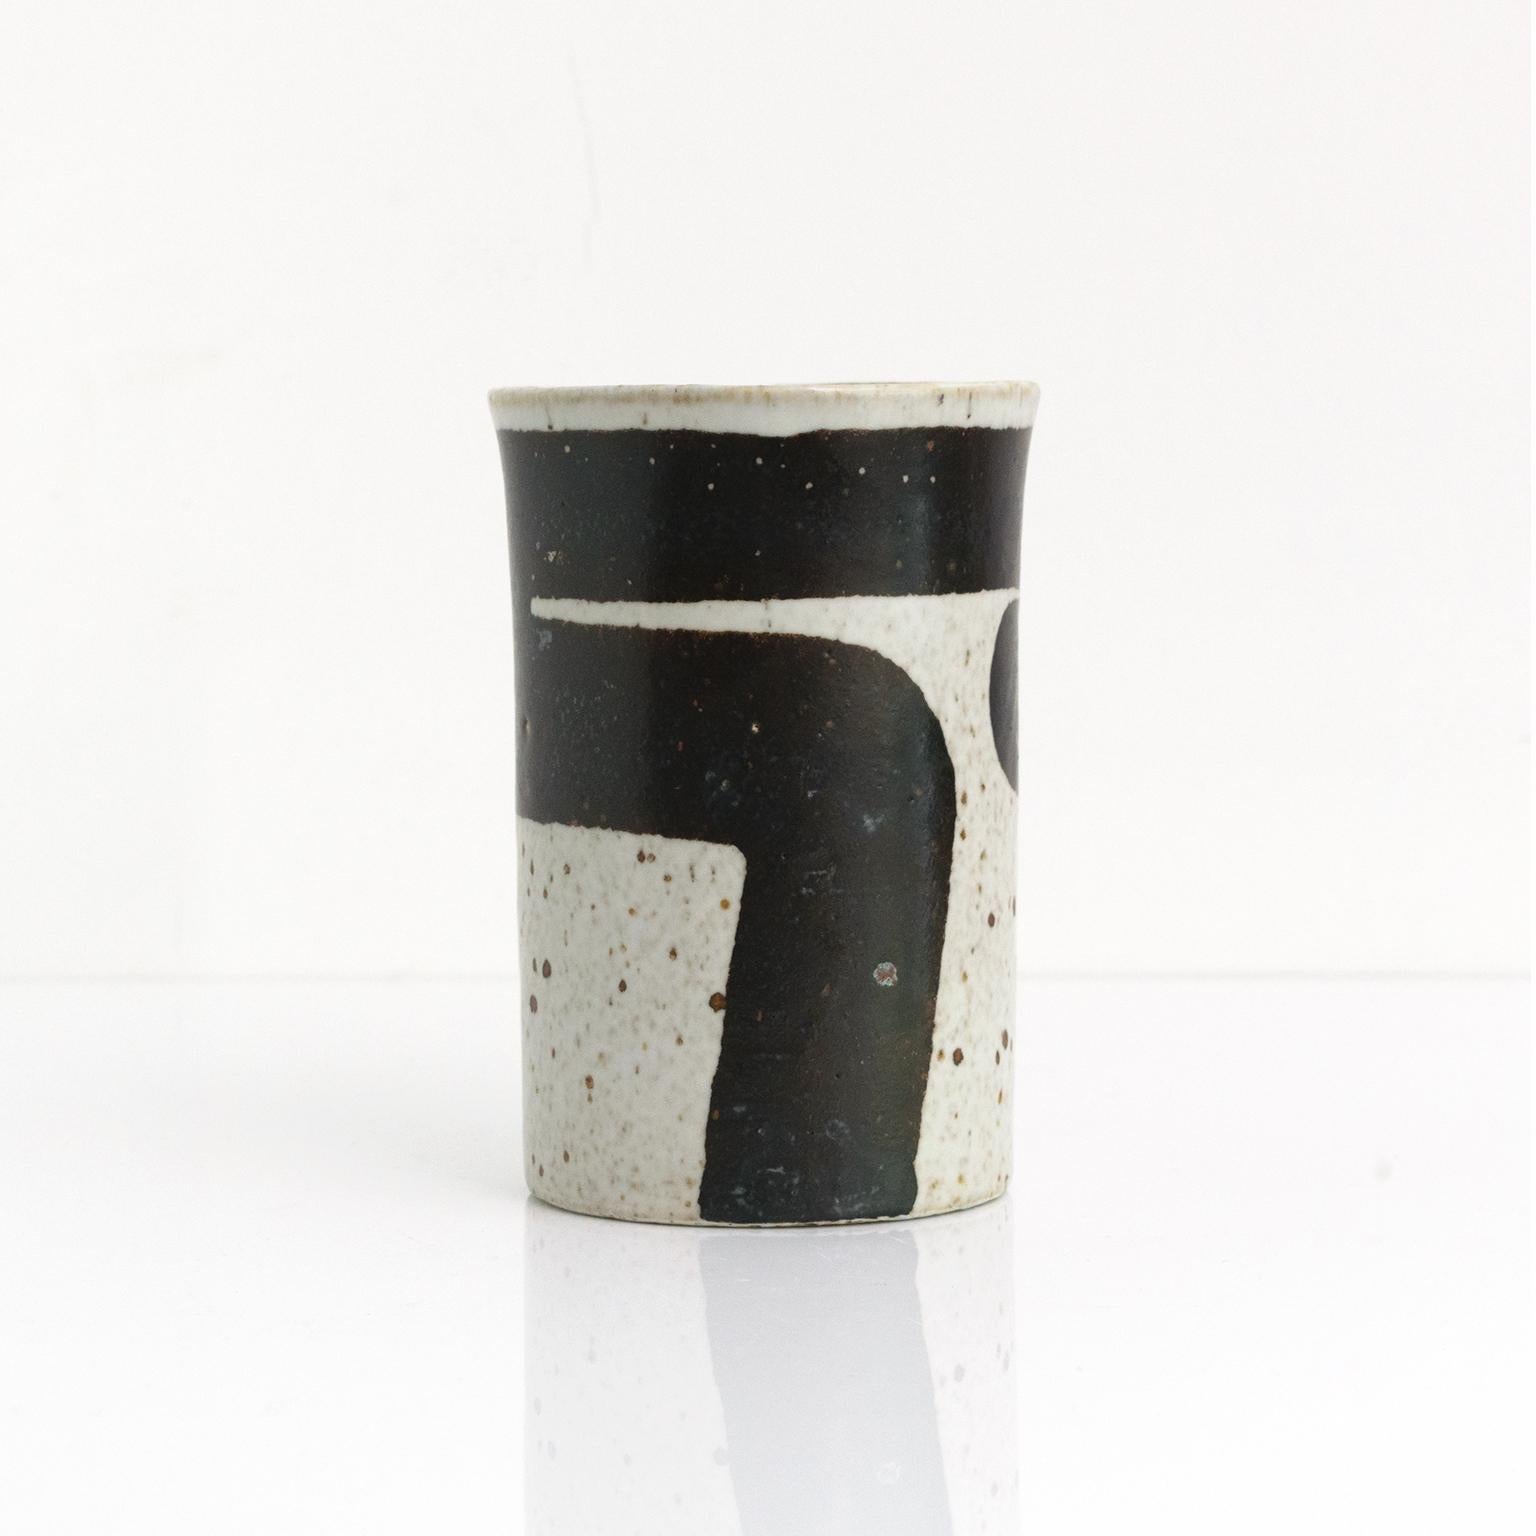 Inger Persson designed this bold graphic ceramic studio vase in the 1960’s for Rorstrand, Sweden. The vase has a slightly squared shape, with a dark brown to black hand painted band against an off white ground. 

Measures: Height 6.25” x Diameter